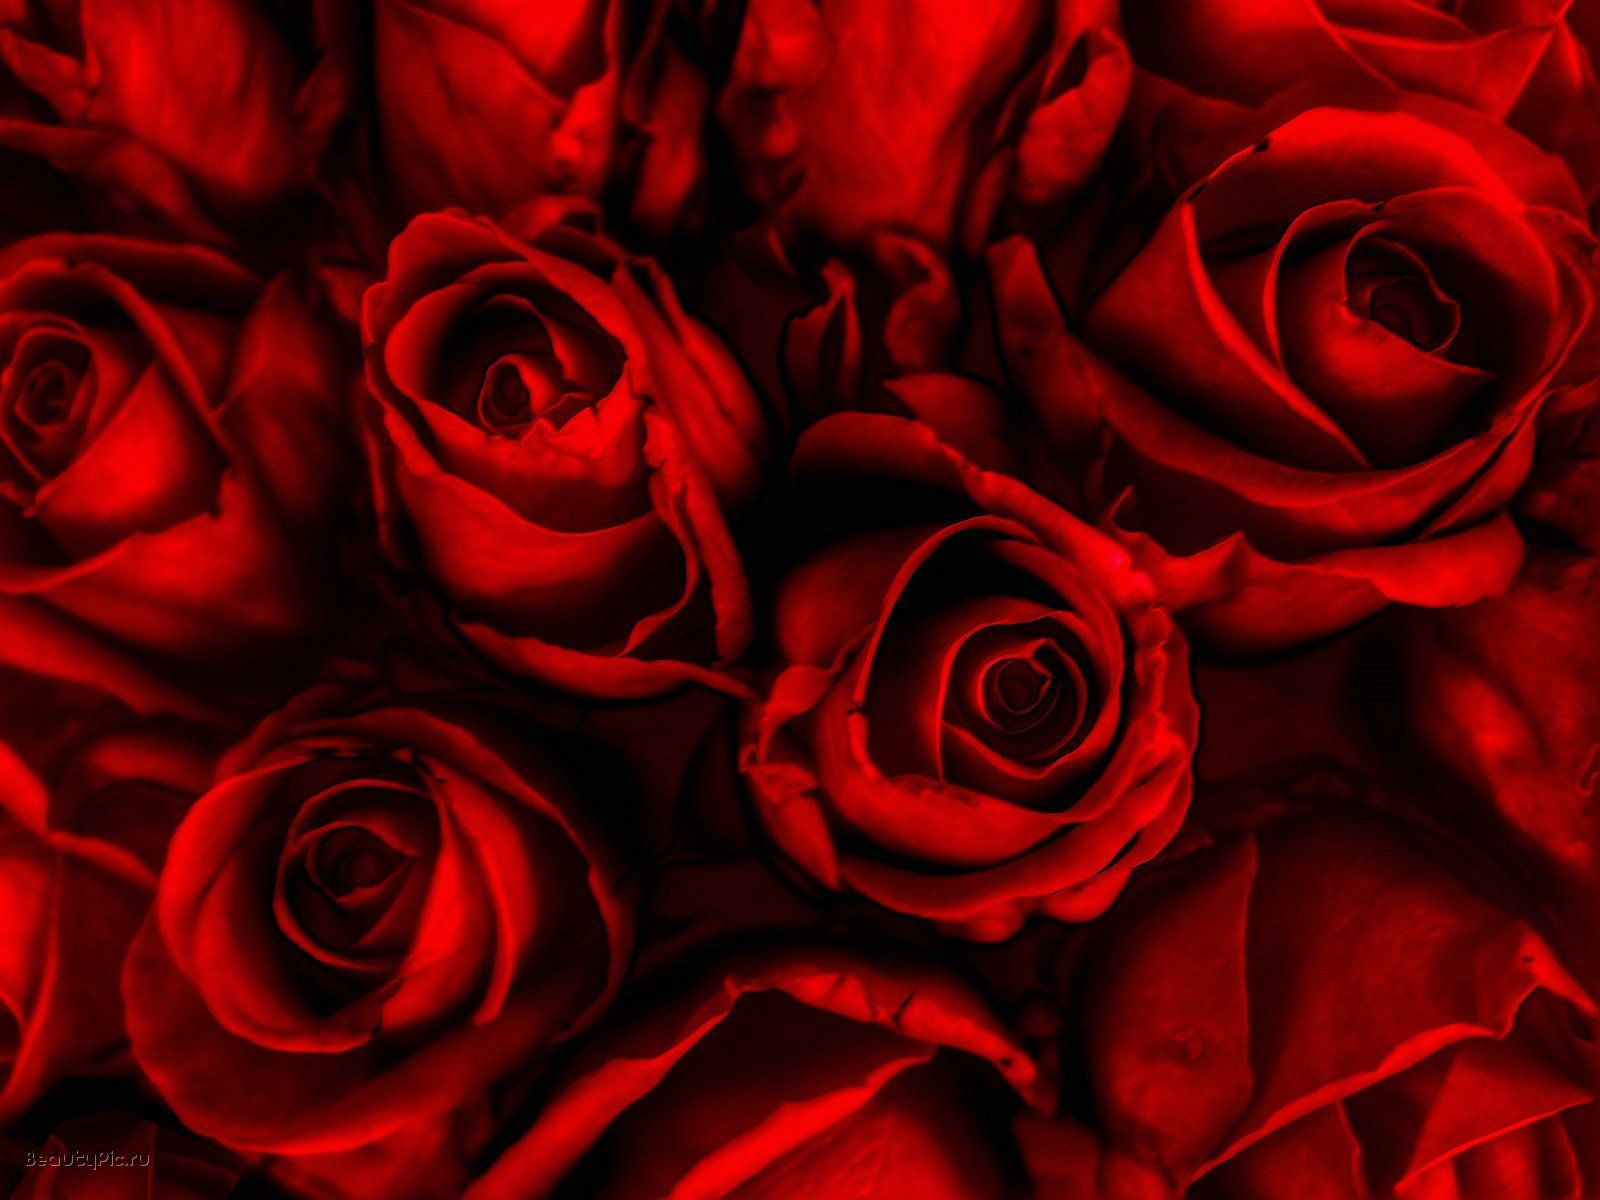 Red Roses Wallpaper Backgrounds | rose backgrounds download free ...